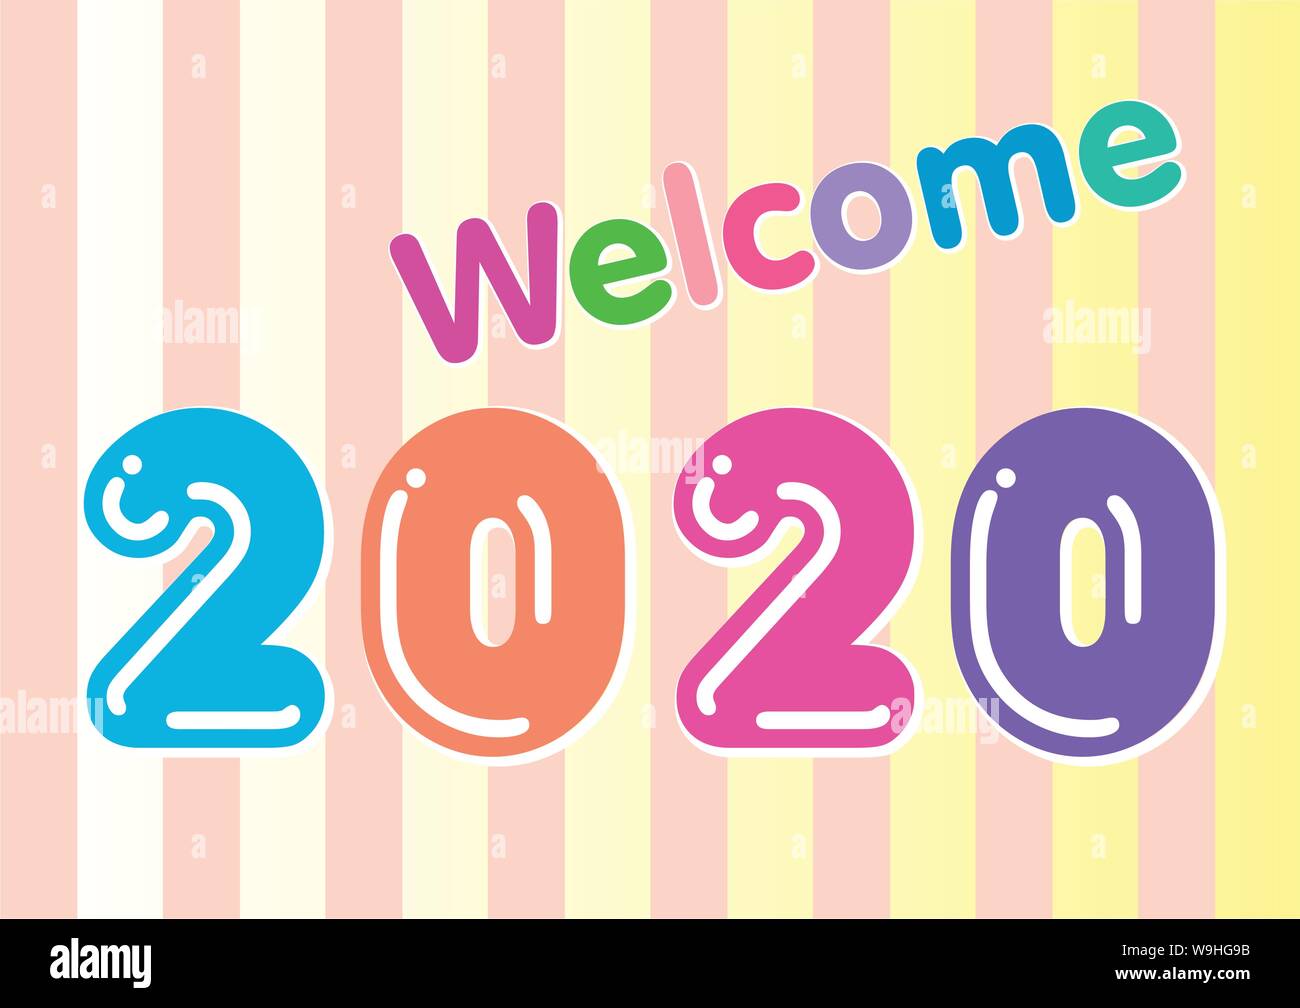 Welcome 2020 illustration vector greeting Stock Vector